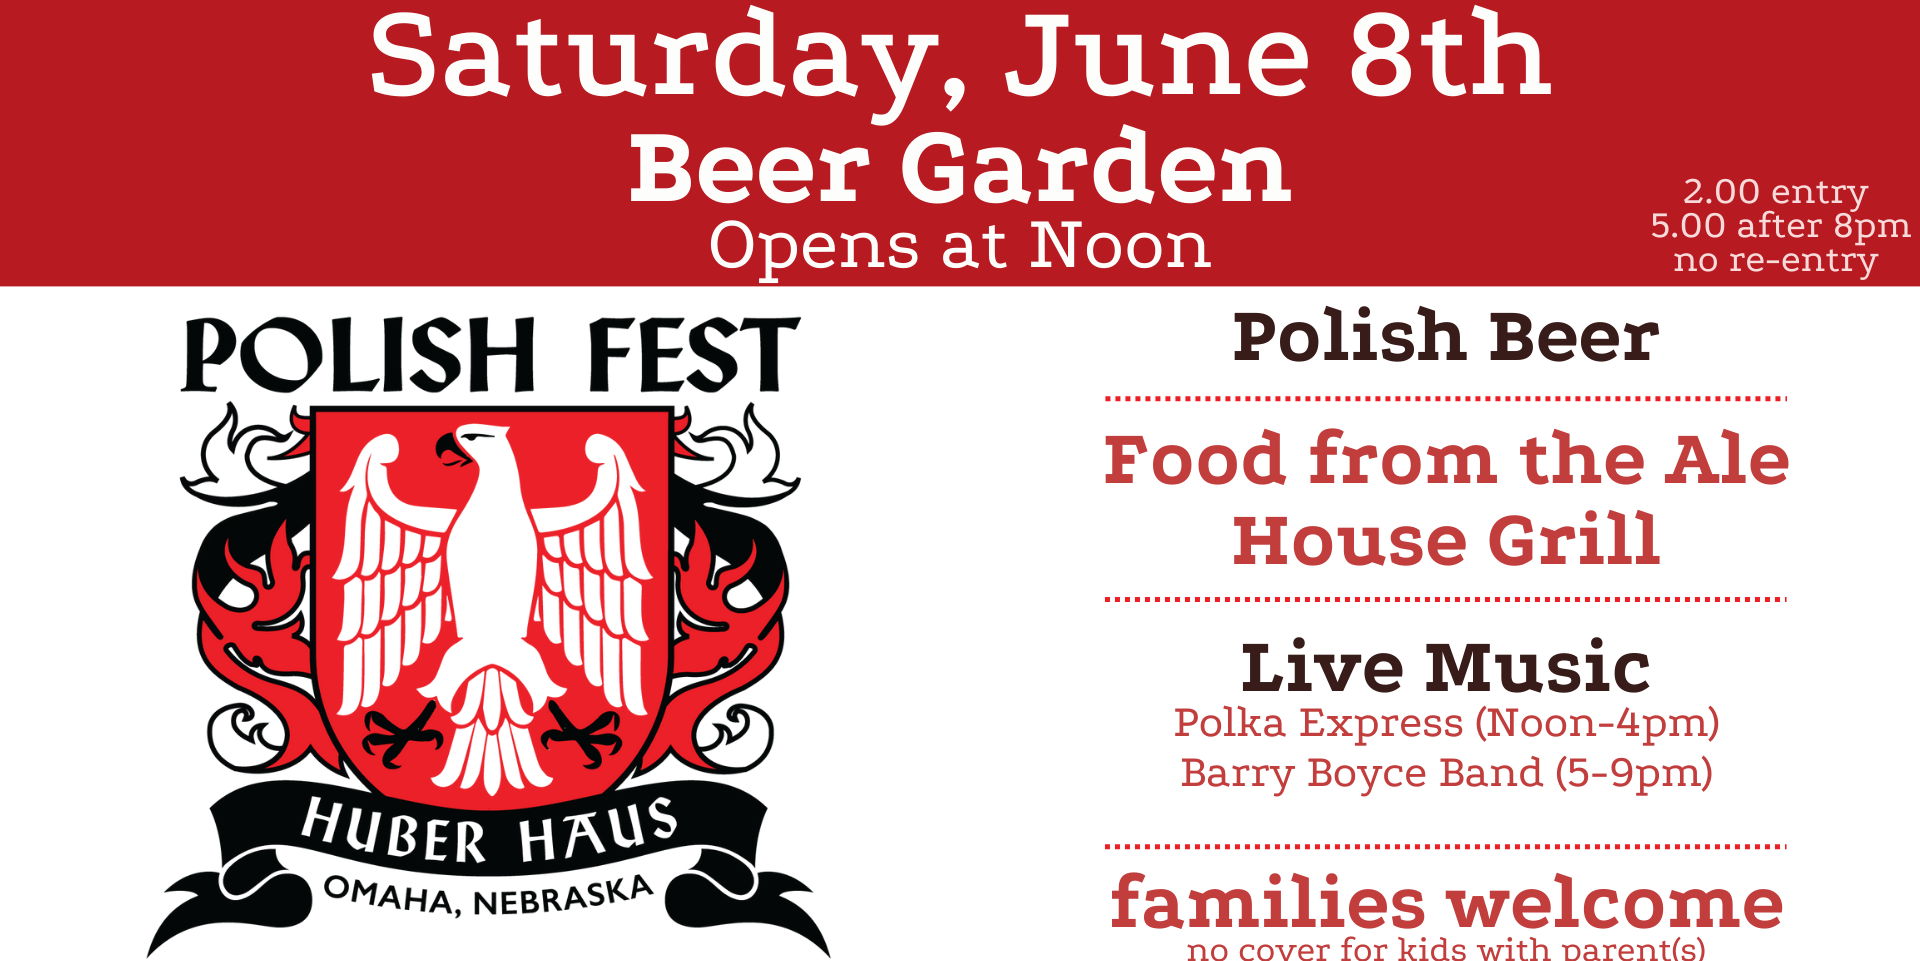 15th Annual Polishfest at Crescent Moon promotional image